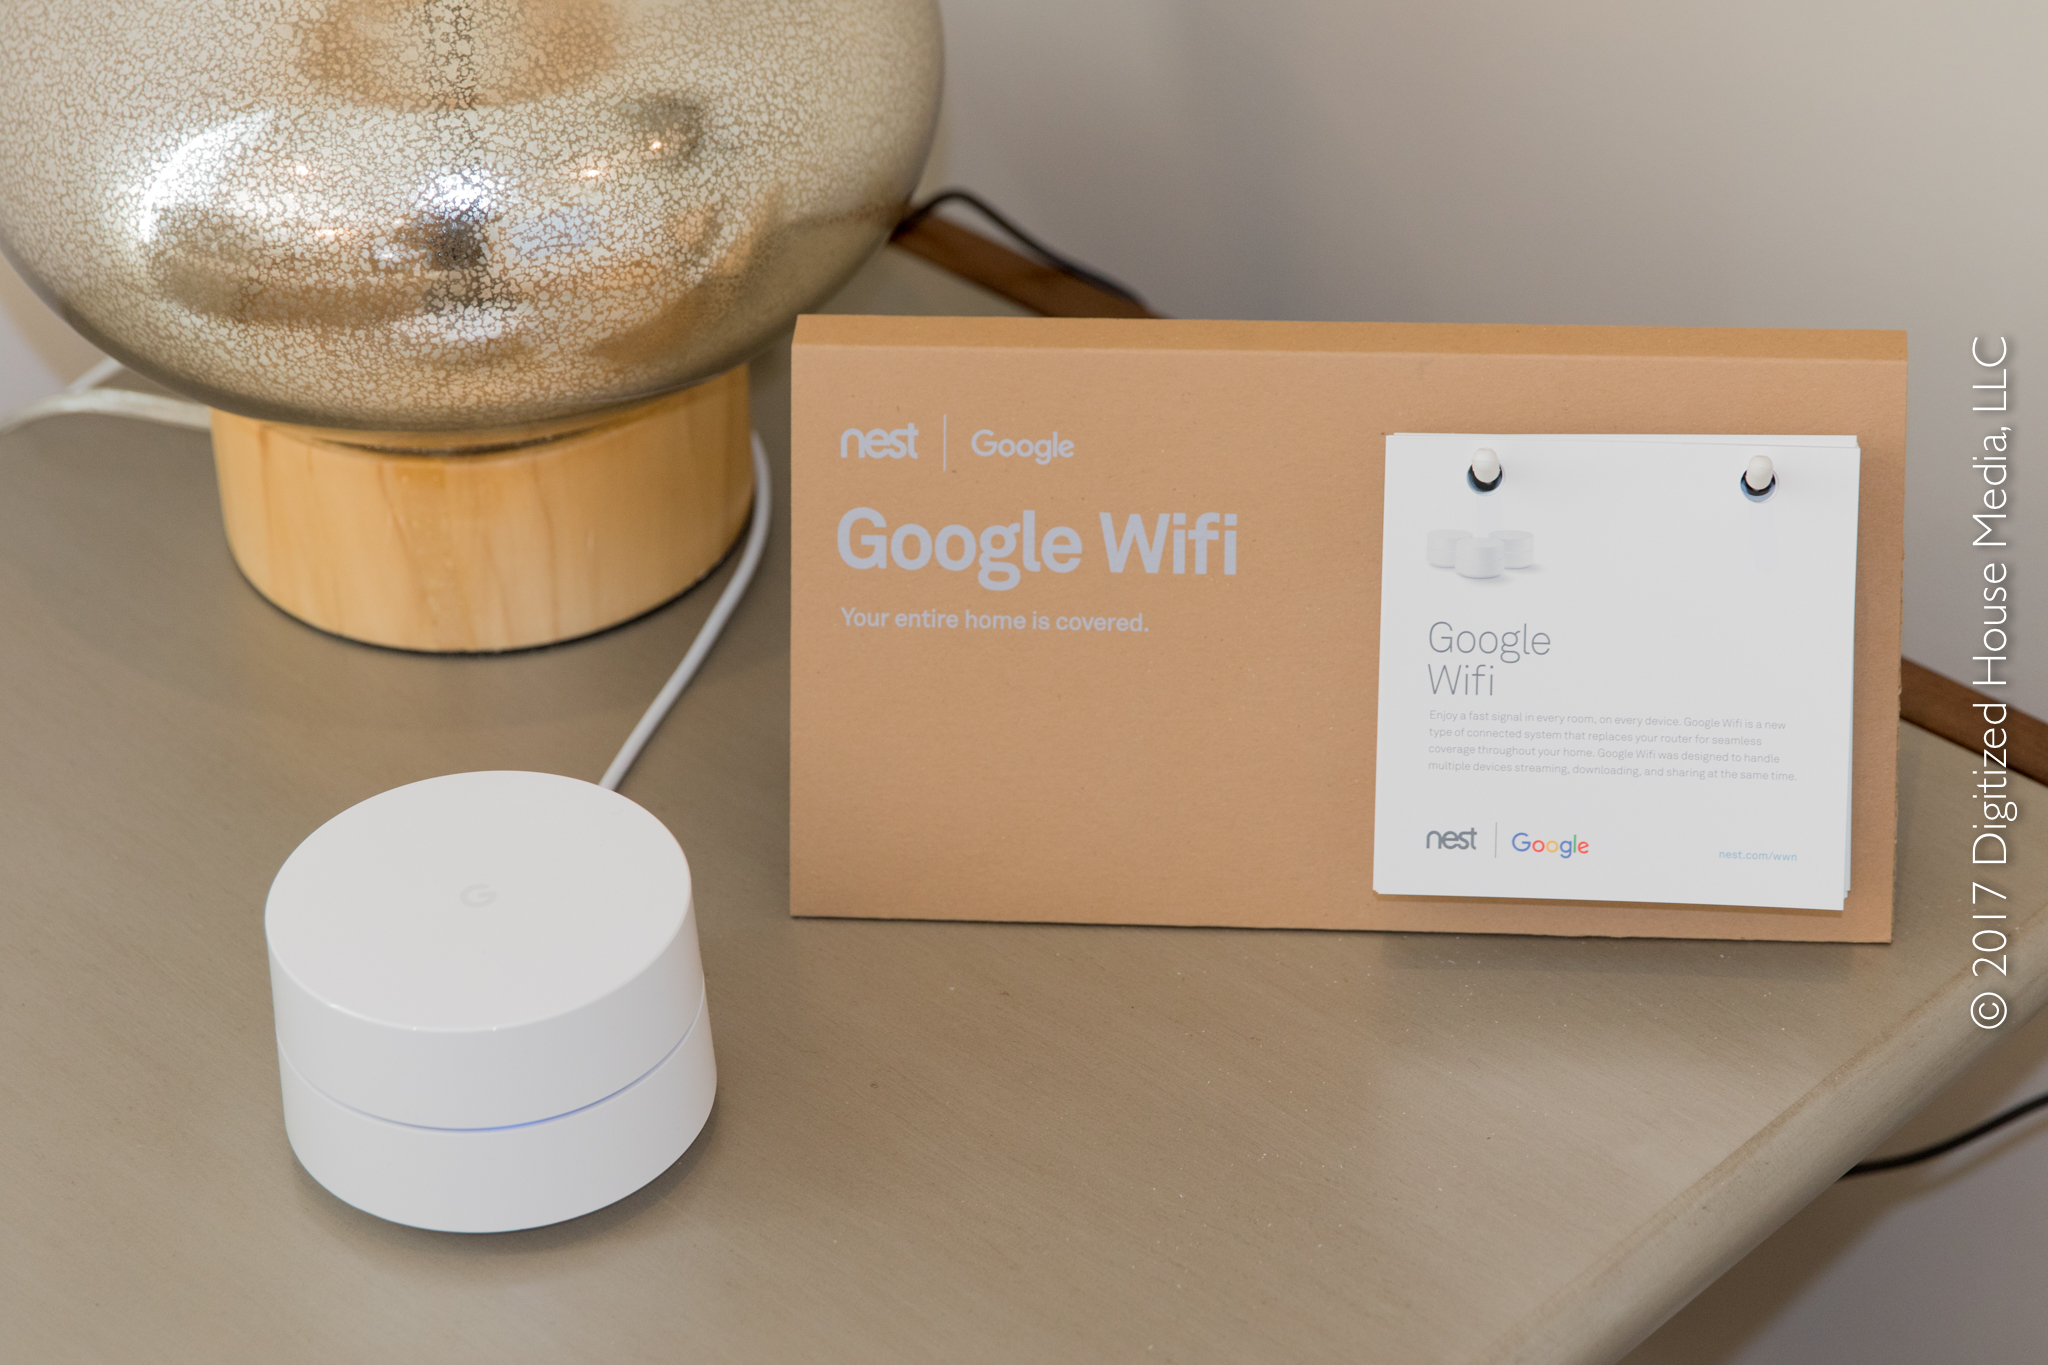 Nest Connected Home: Google WiFi